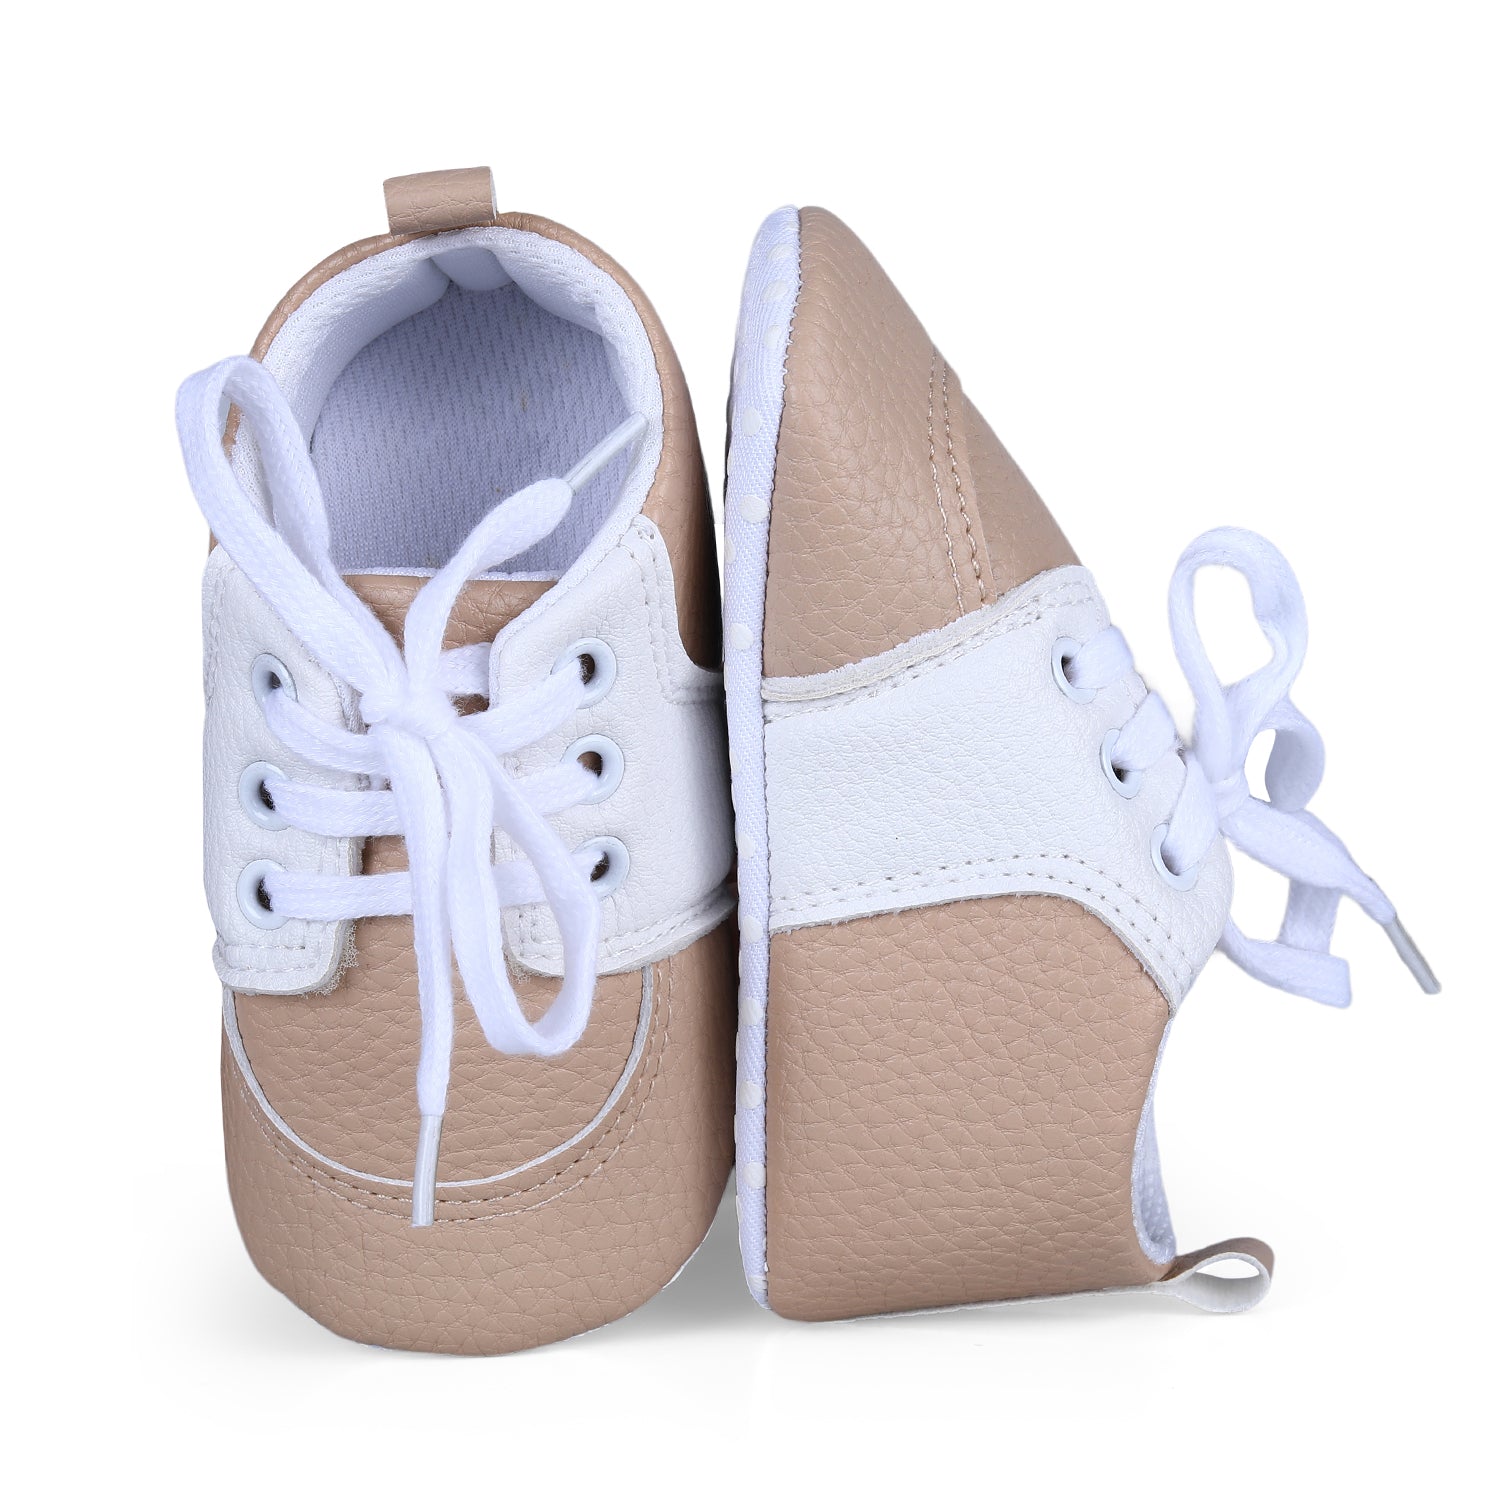 Lace-Up Stylish Leather Sneaker Shoes - Beige - Baby Moo